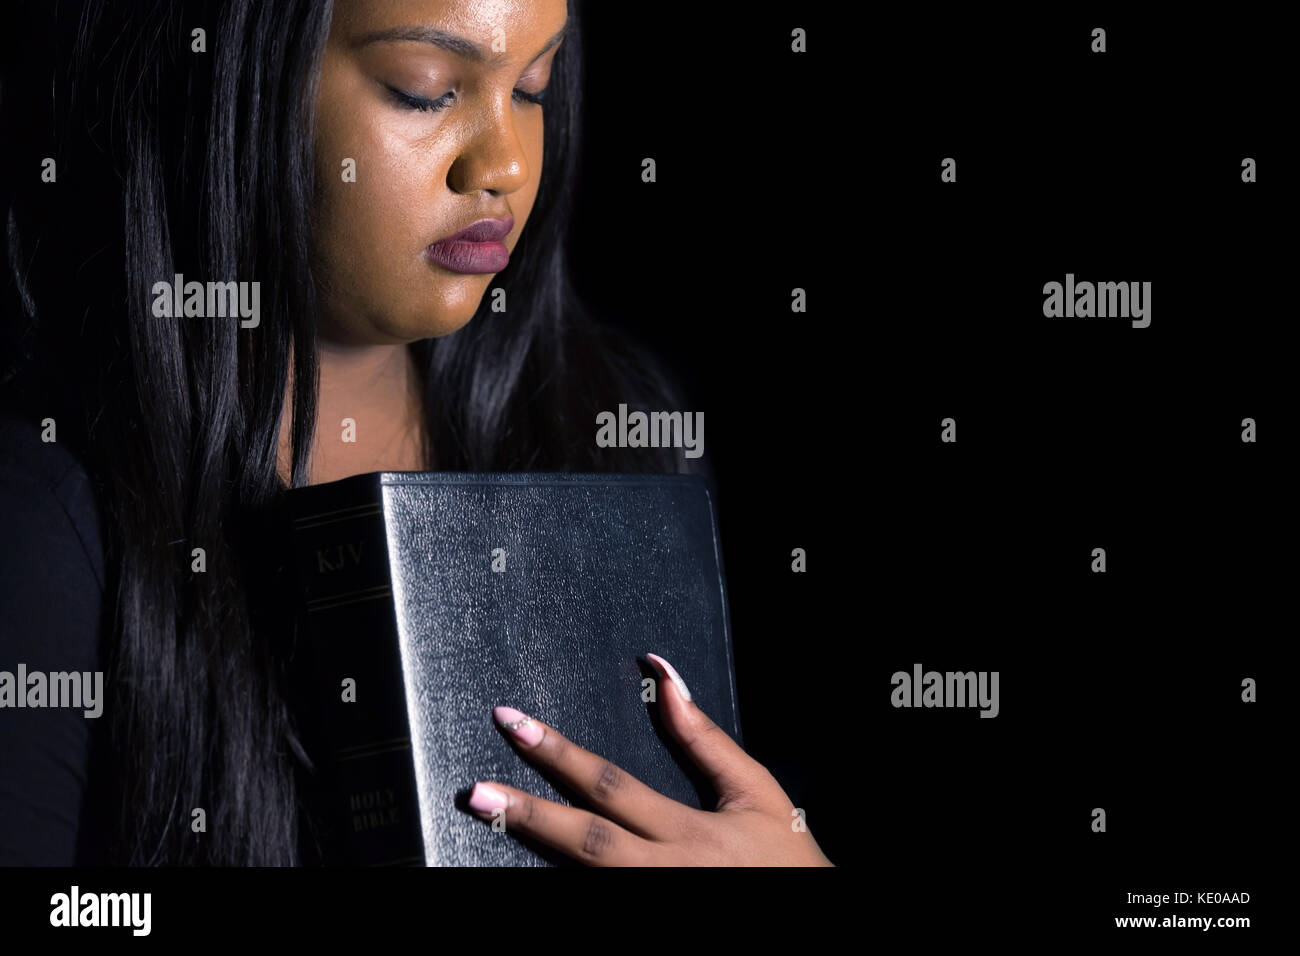 Persecuted Young Girl Holding Her Bible in the Darkness Stock Photo